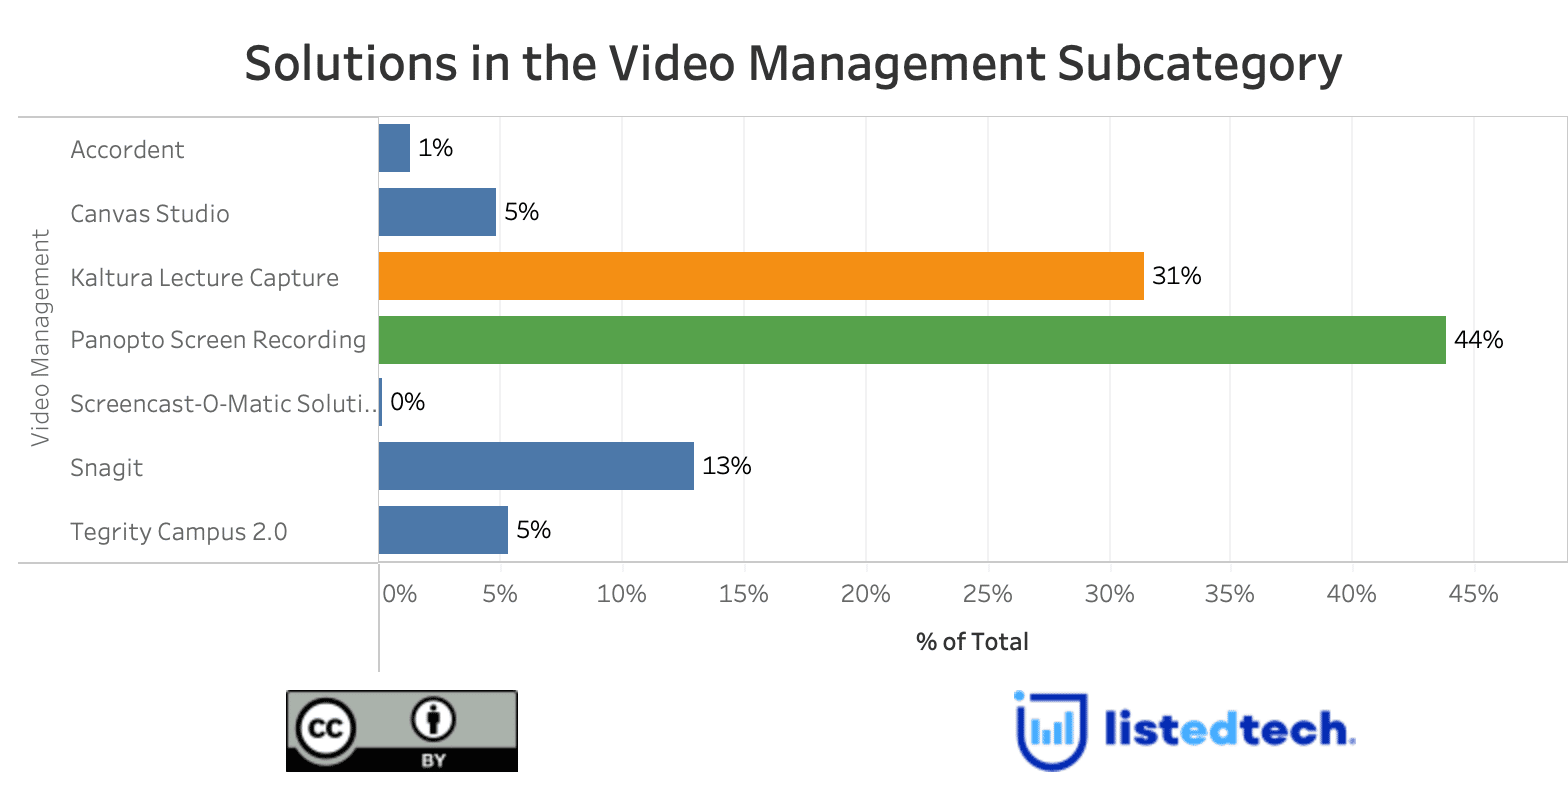 Solutions in the Video Management Subcategory